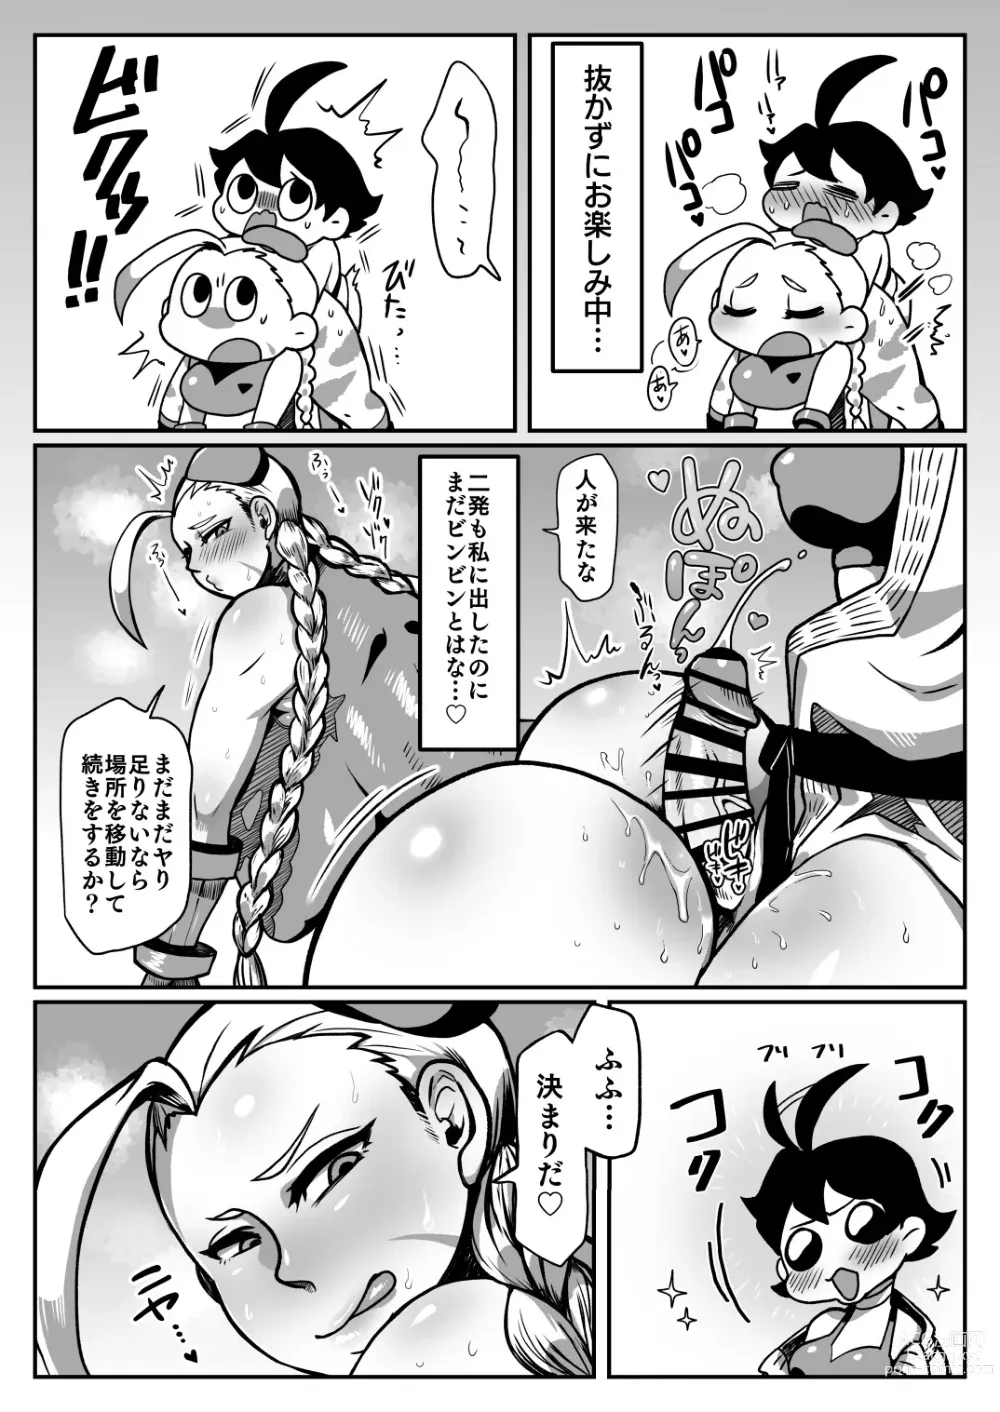 Page 10 of doujinshi Makommy